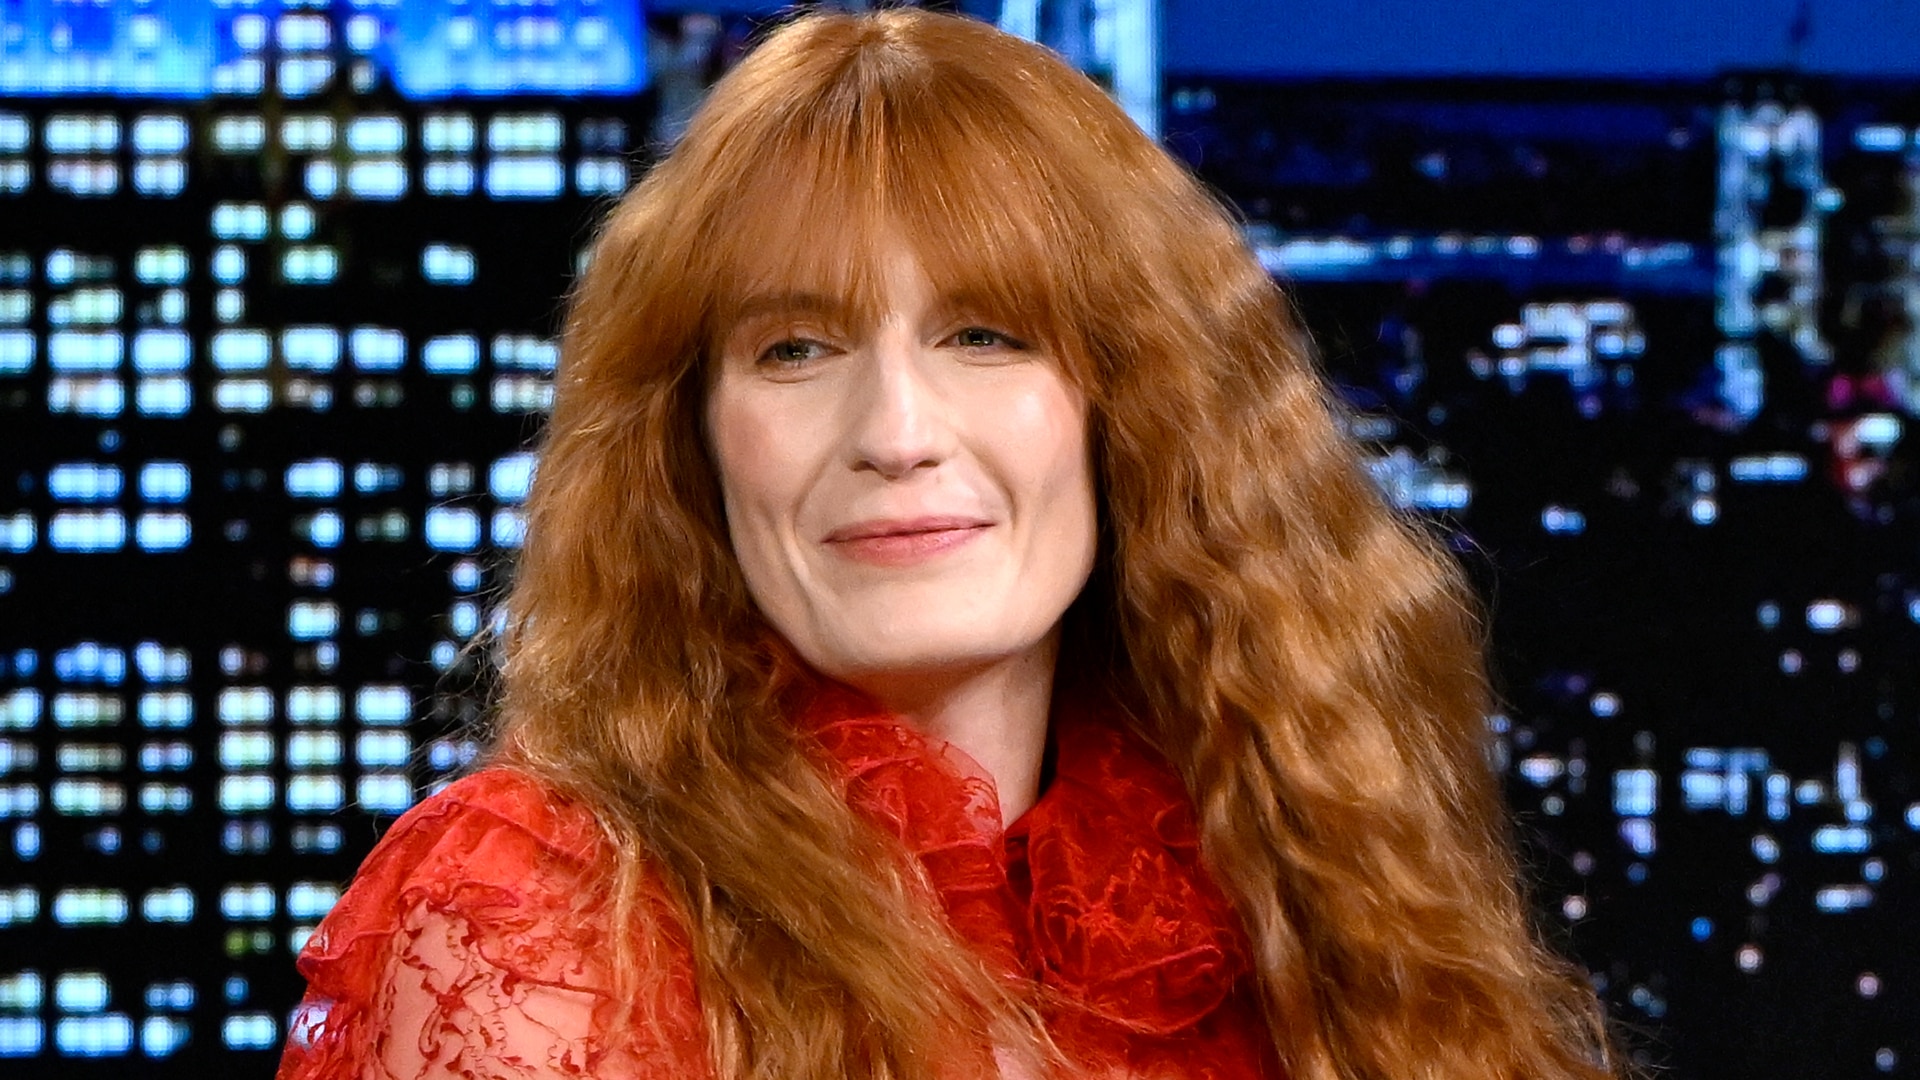 Watch The Tonight Show Starring Jimmy Fallon Highlight Florence Welch